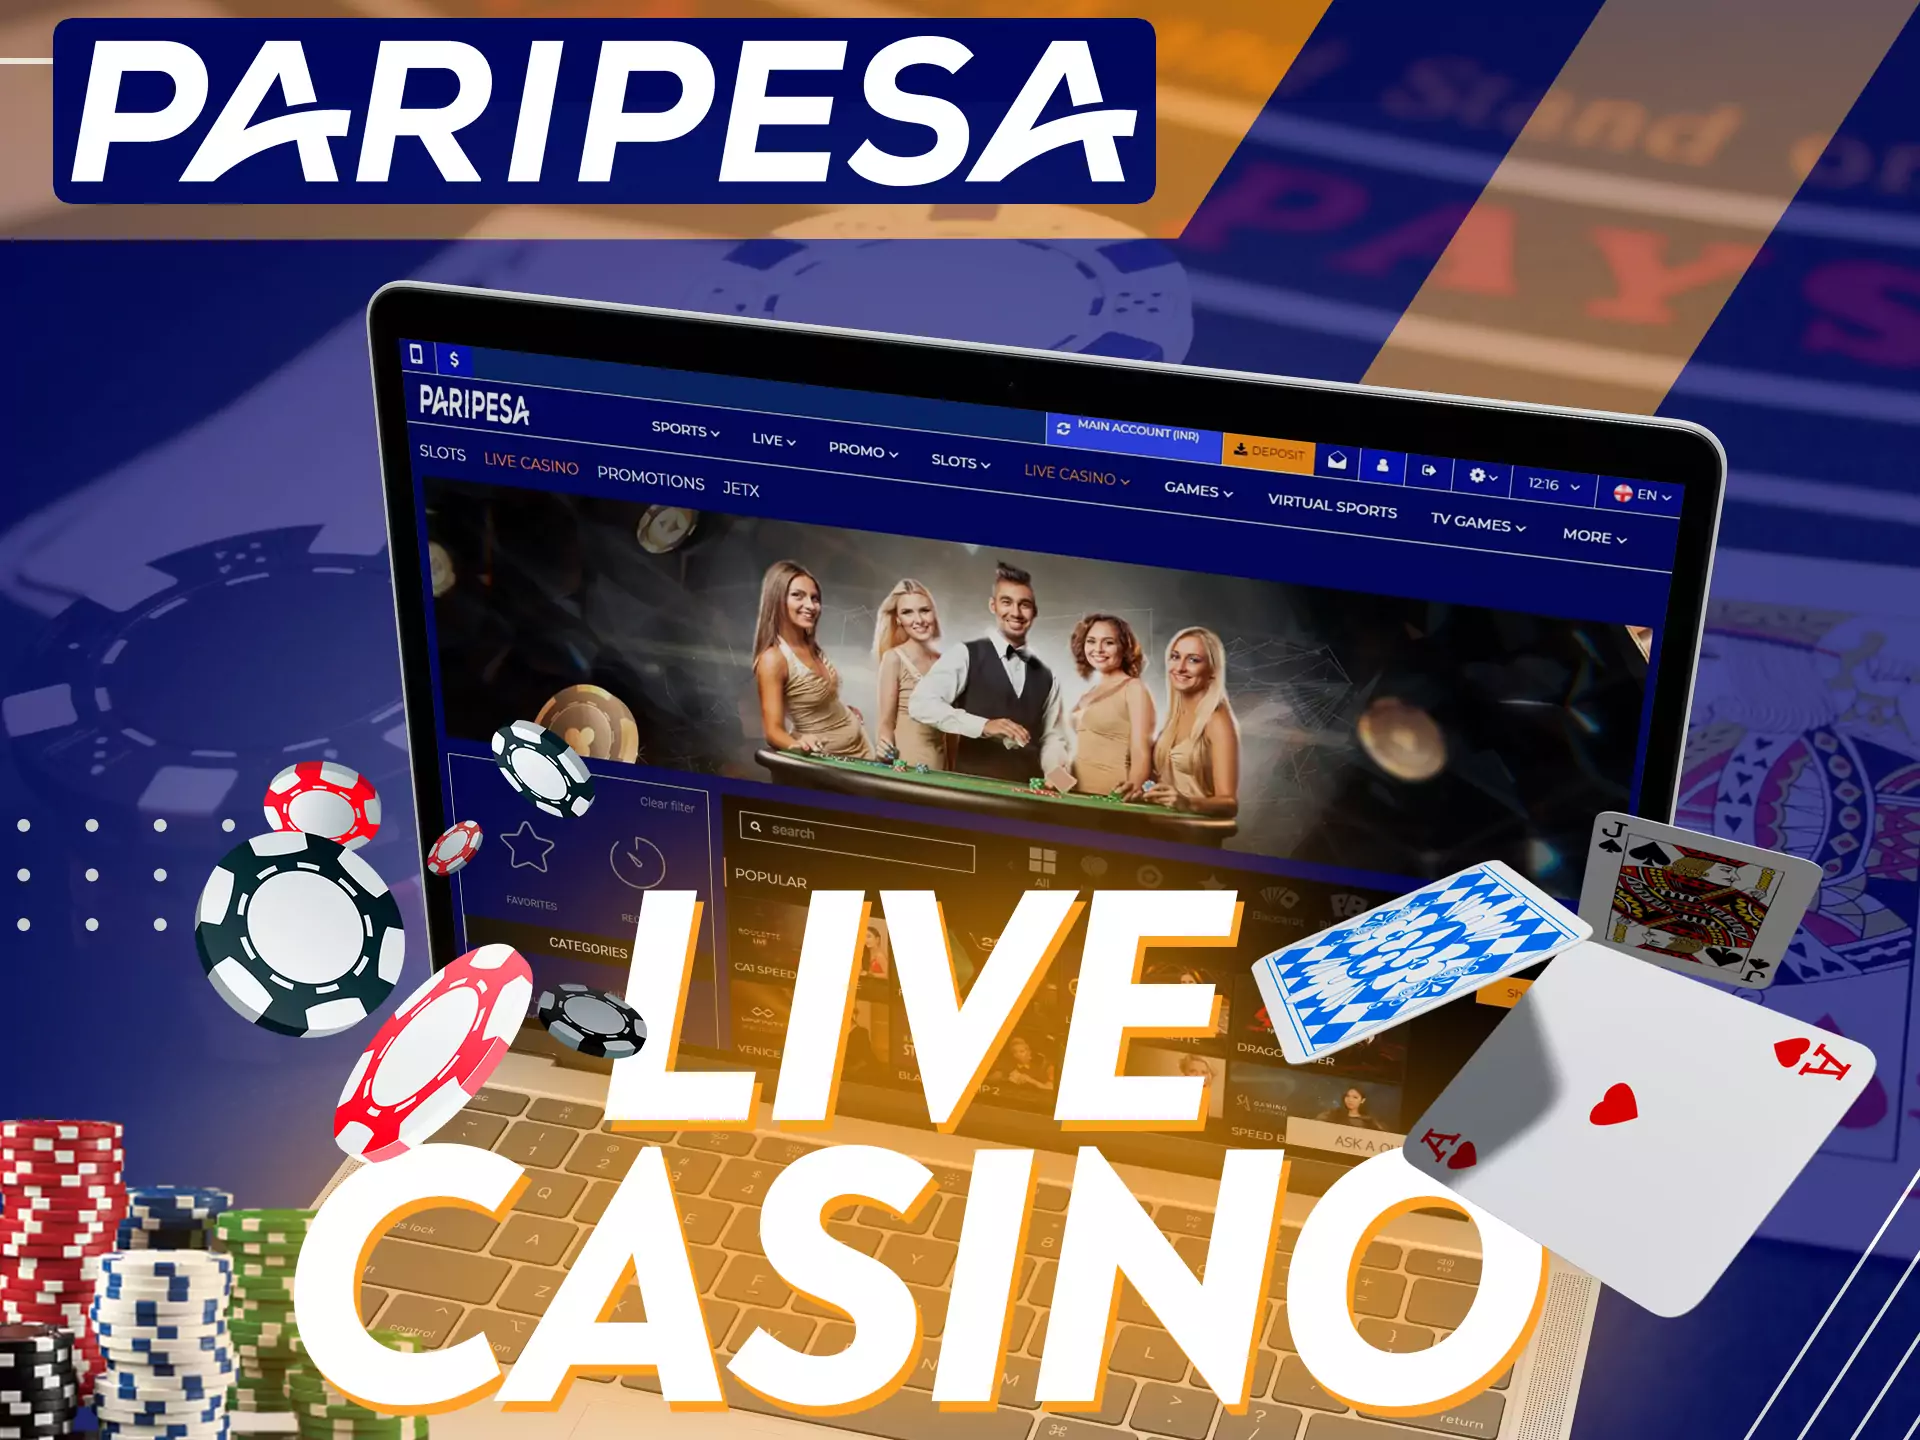 At Paripesa you can play live casino games with real dealers.